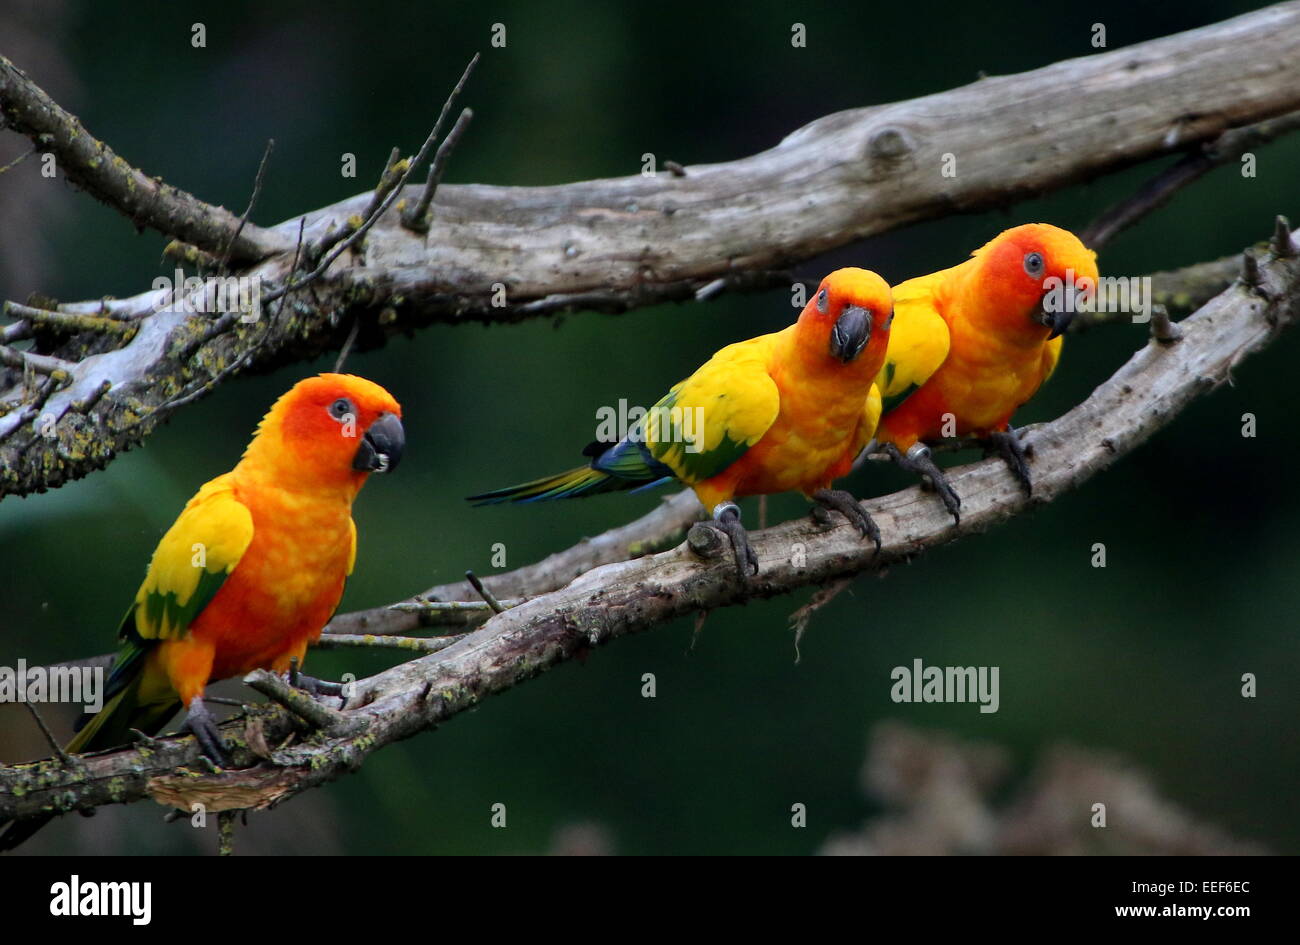 Group of three male and female South American Sun Parakeets or Sun Conures (Aratinga solstitialis) perched on a branch Stock Photo